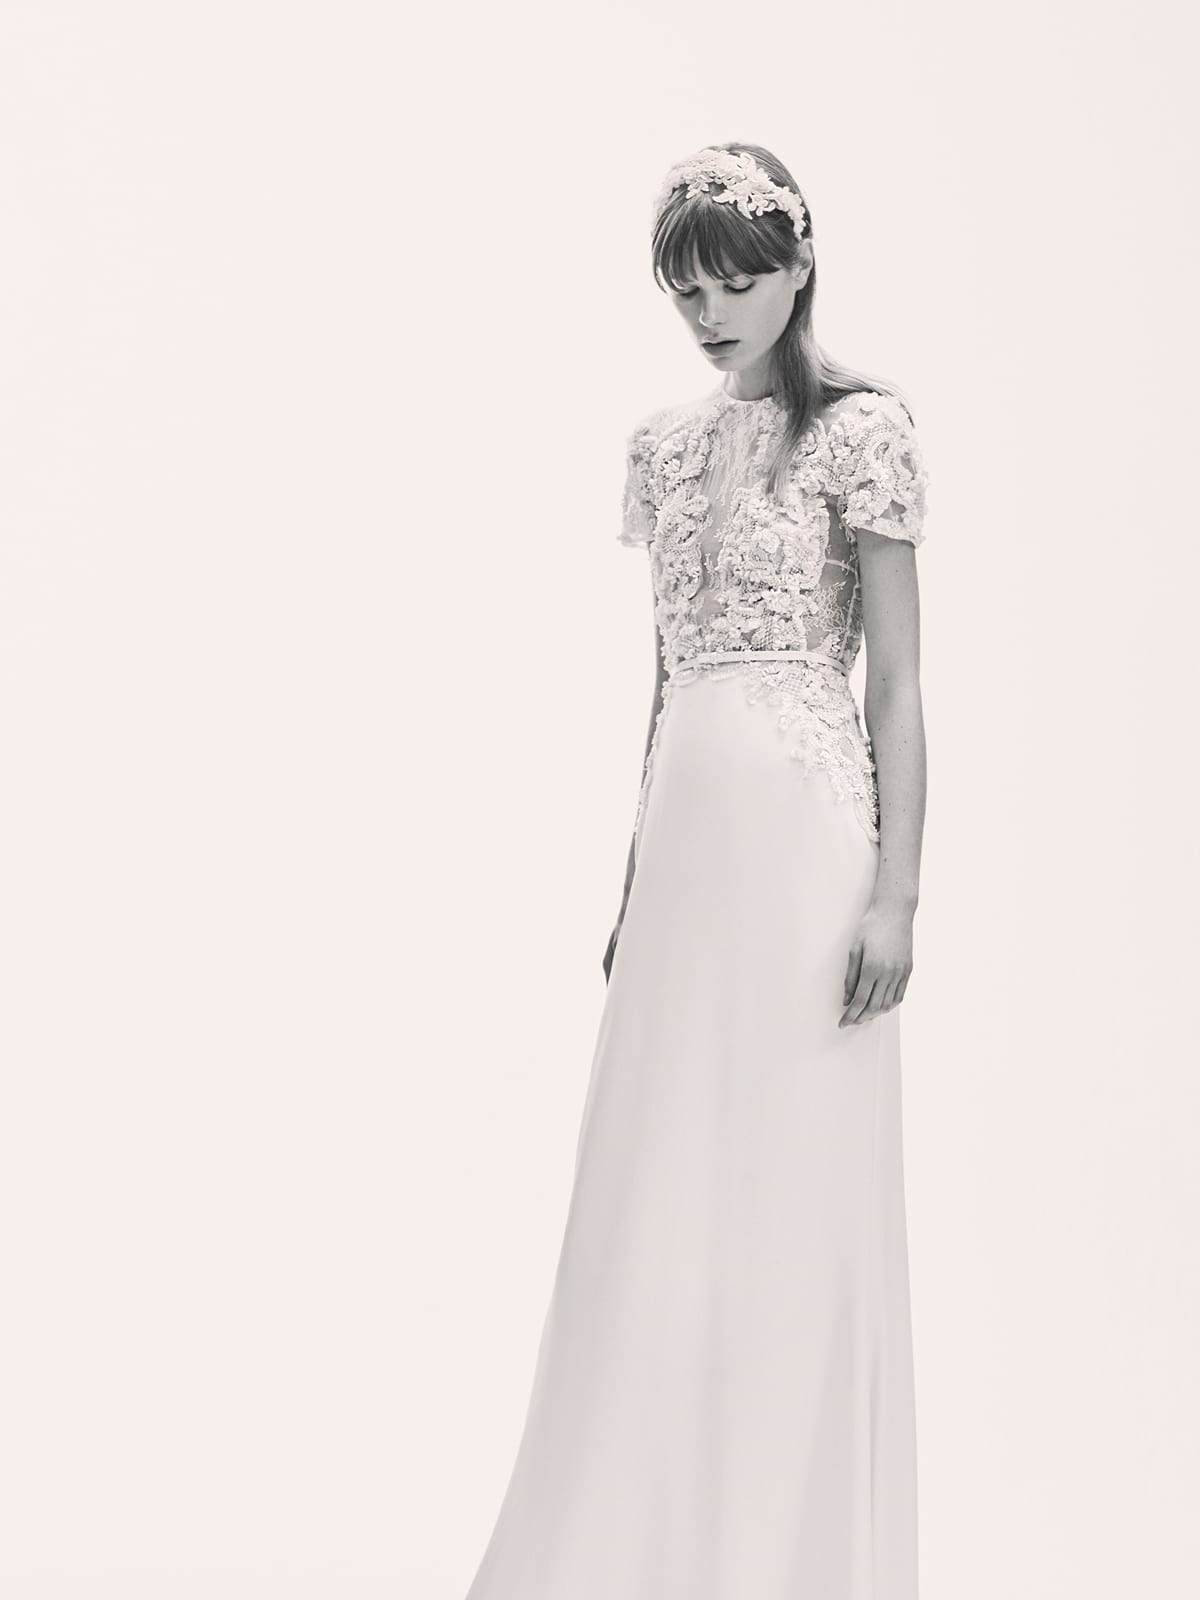 Ethereal wedding dress with 3D applique embroideries